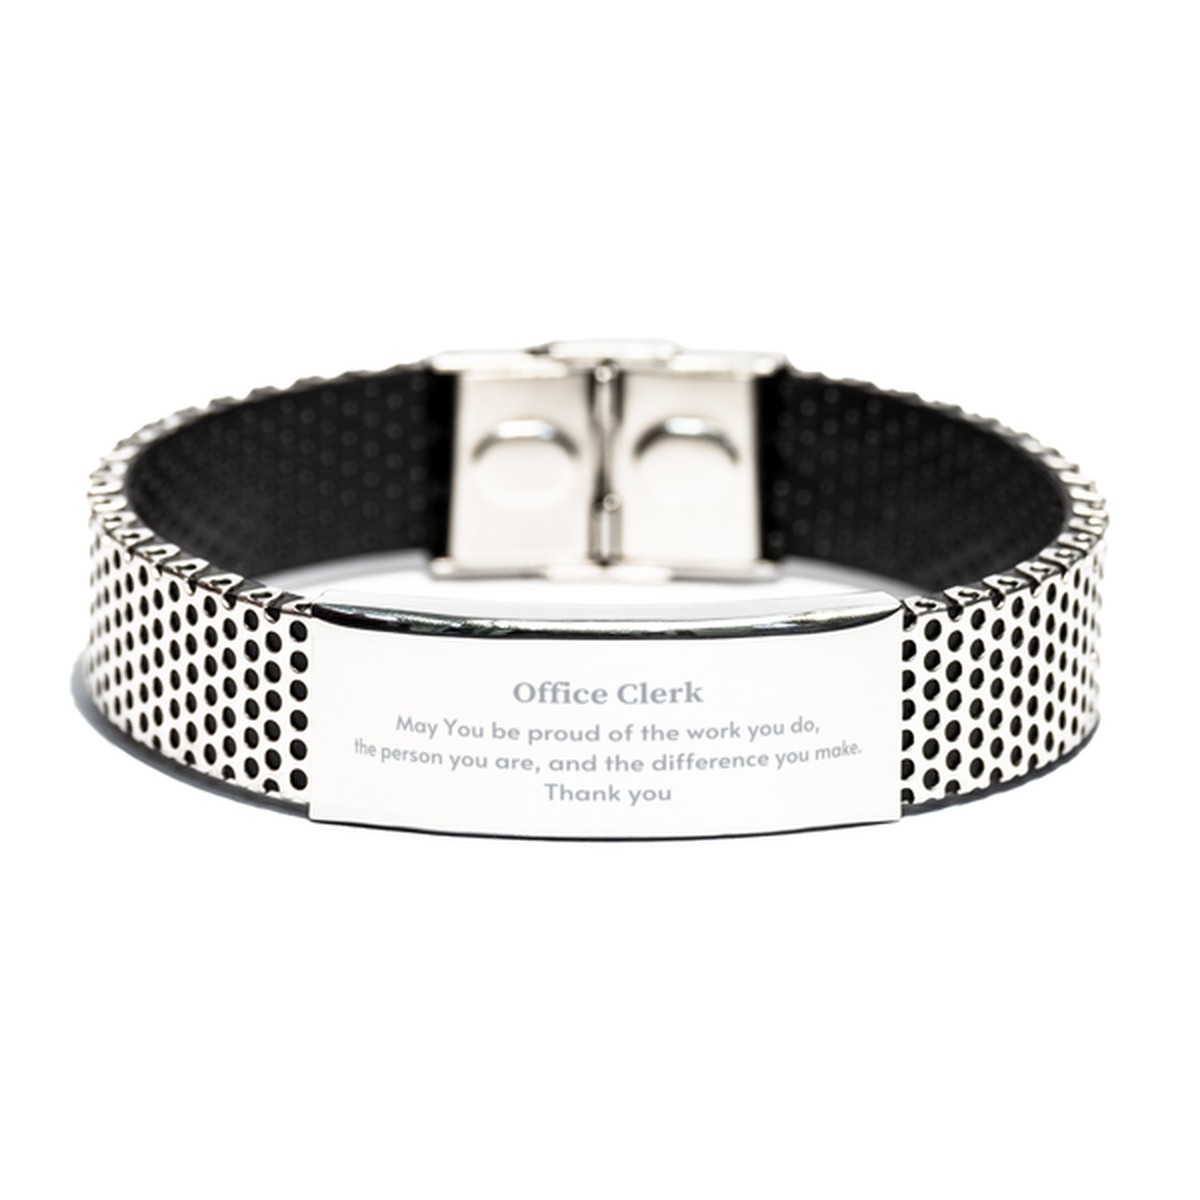 Heartwarming Stainless Steel Bracelet Retirement Coworkers Gifts for Office Clerk, Office Clerk May You be proud of the work you do, the person you are Gifts for Boss Men Women Friends